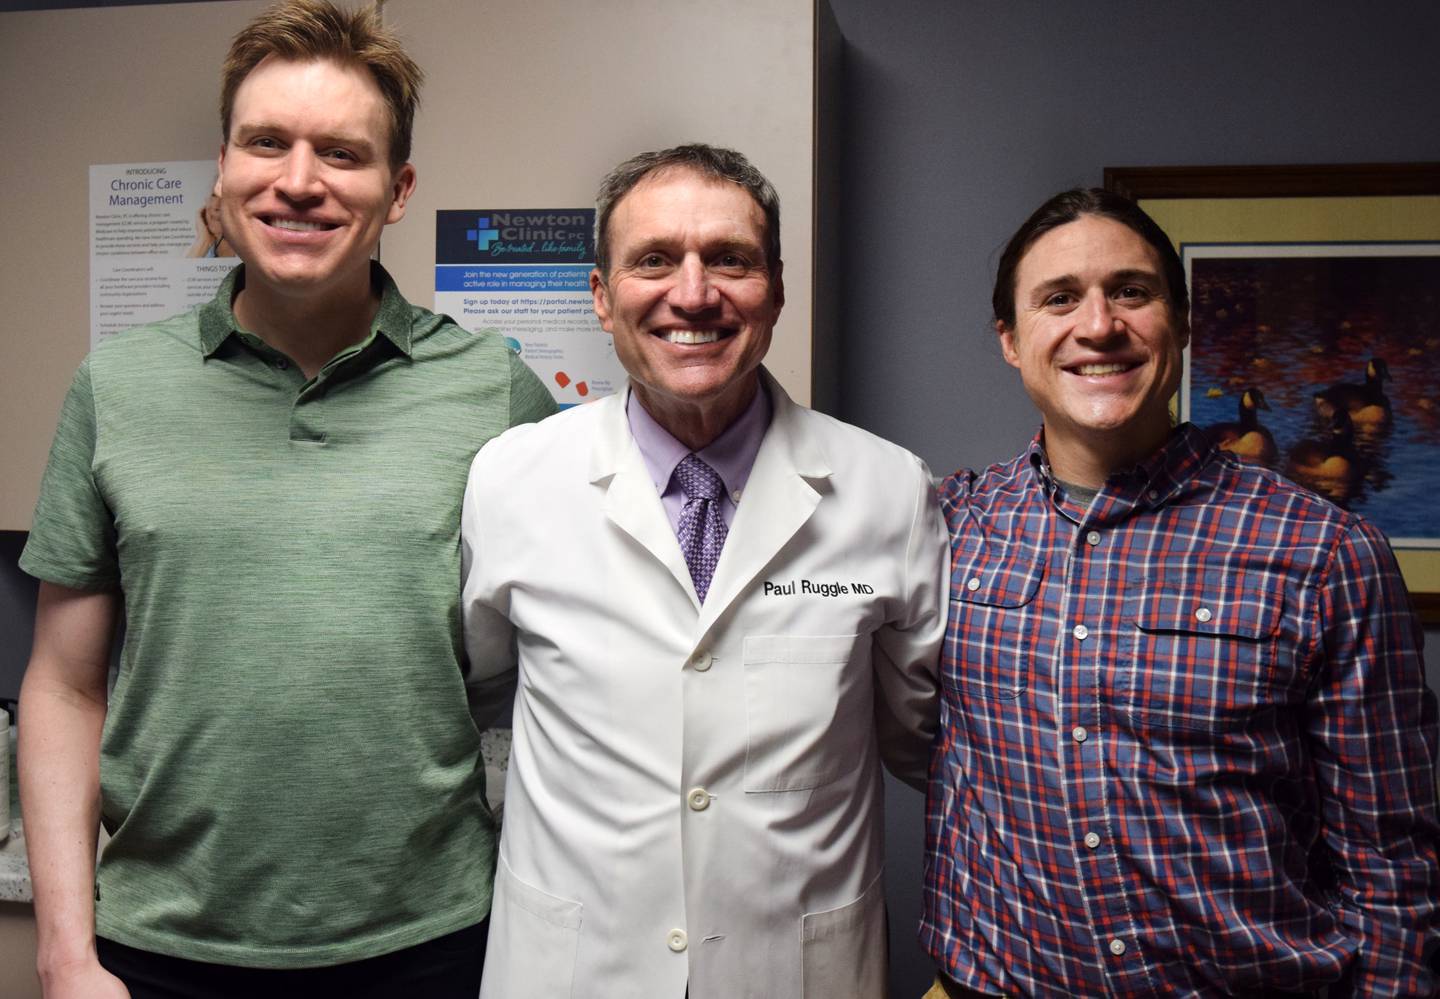 Dr. Paul Ruggle of Newton Clinic, center, with sons Adam and Brian will be retiring from his practice by the end of the month, marking a 39-year history with the facility and more than 40 years of experience practicing medicine. His passion for helping people has spread to his sons, with Adam in psychiatry and Brian practicing family medicine.